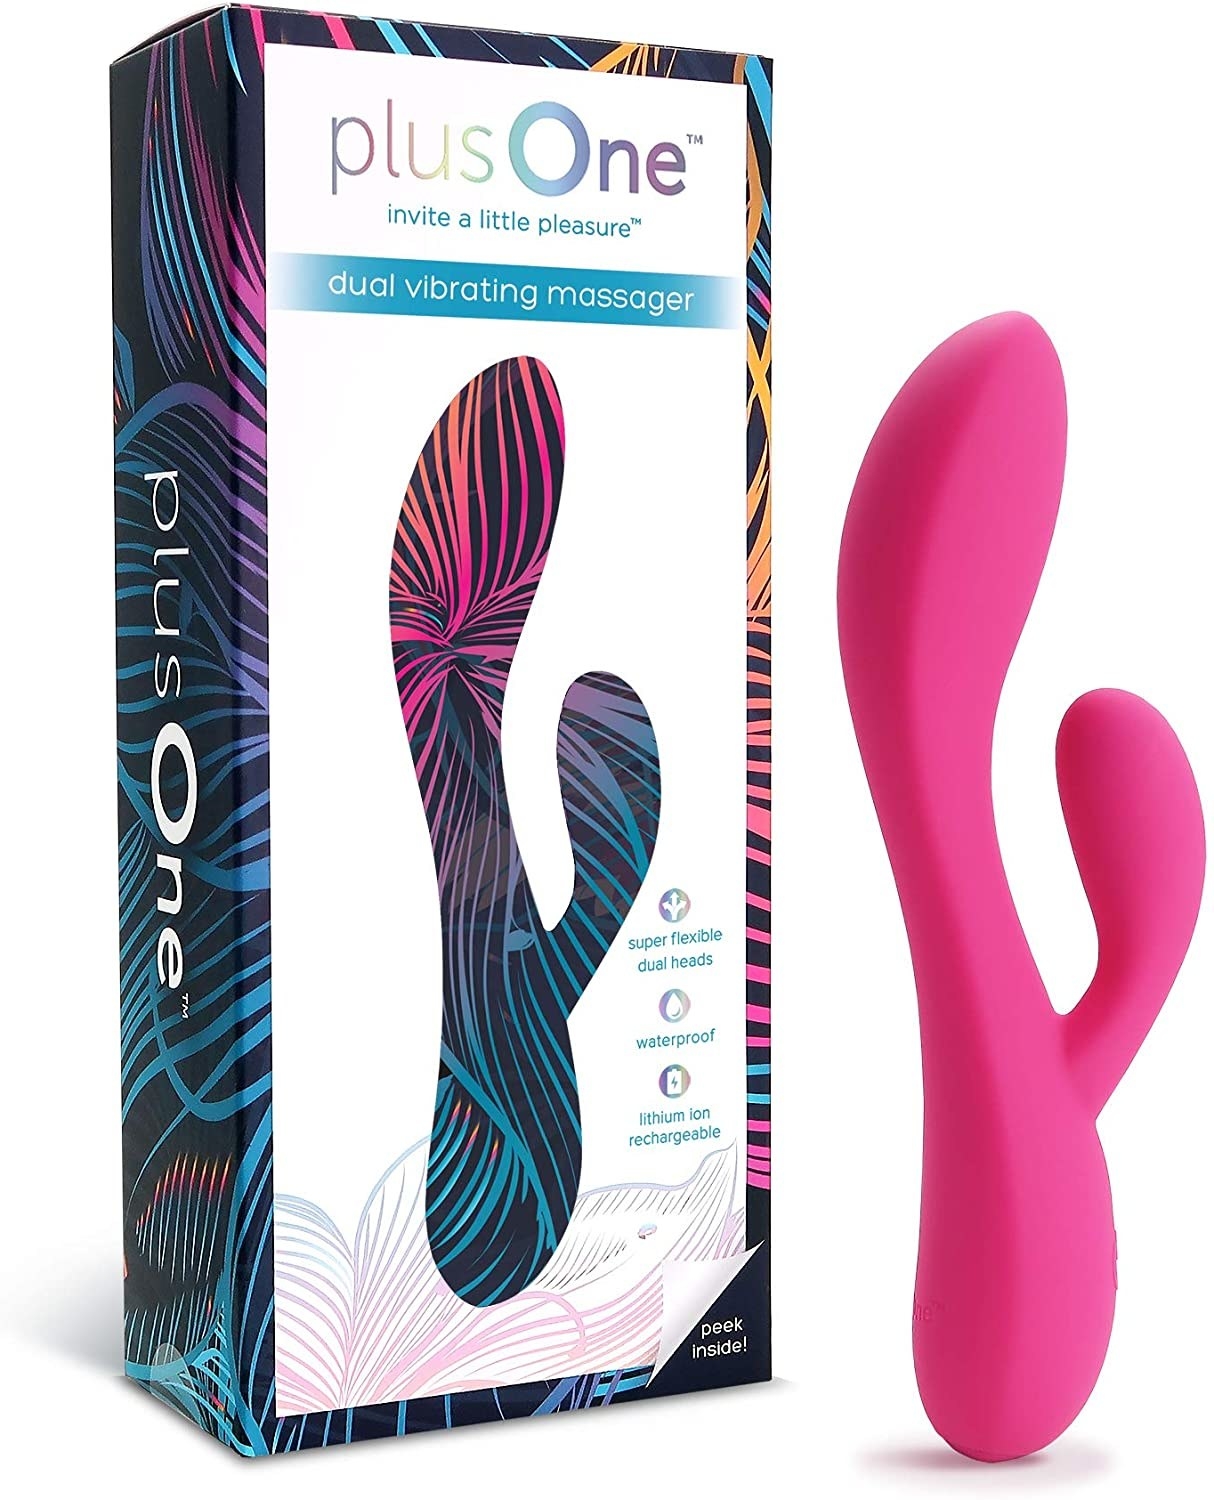 the pink vibrator and its box